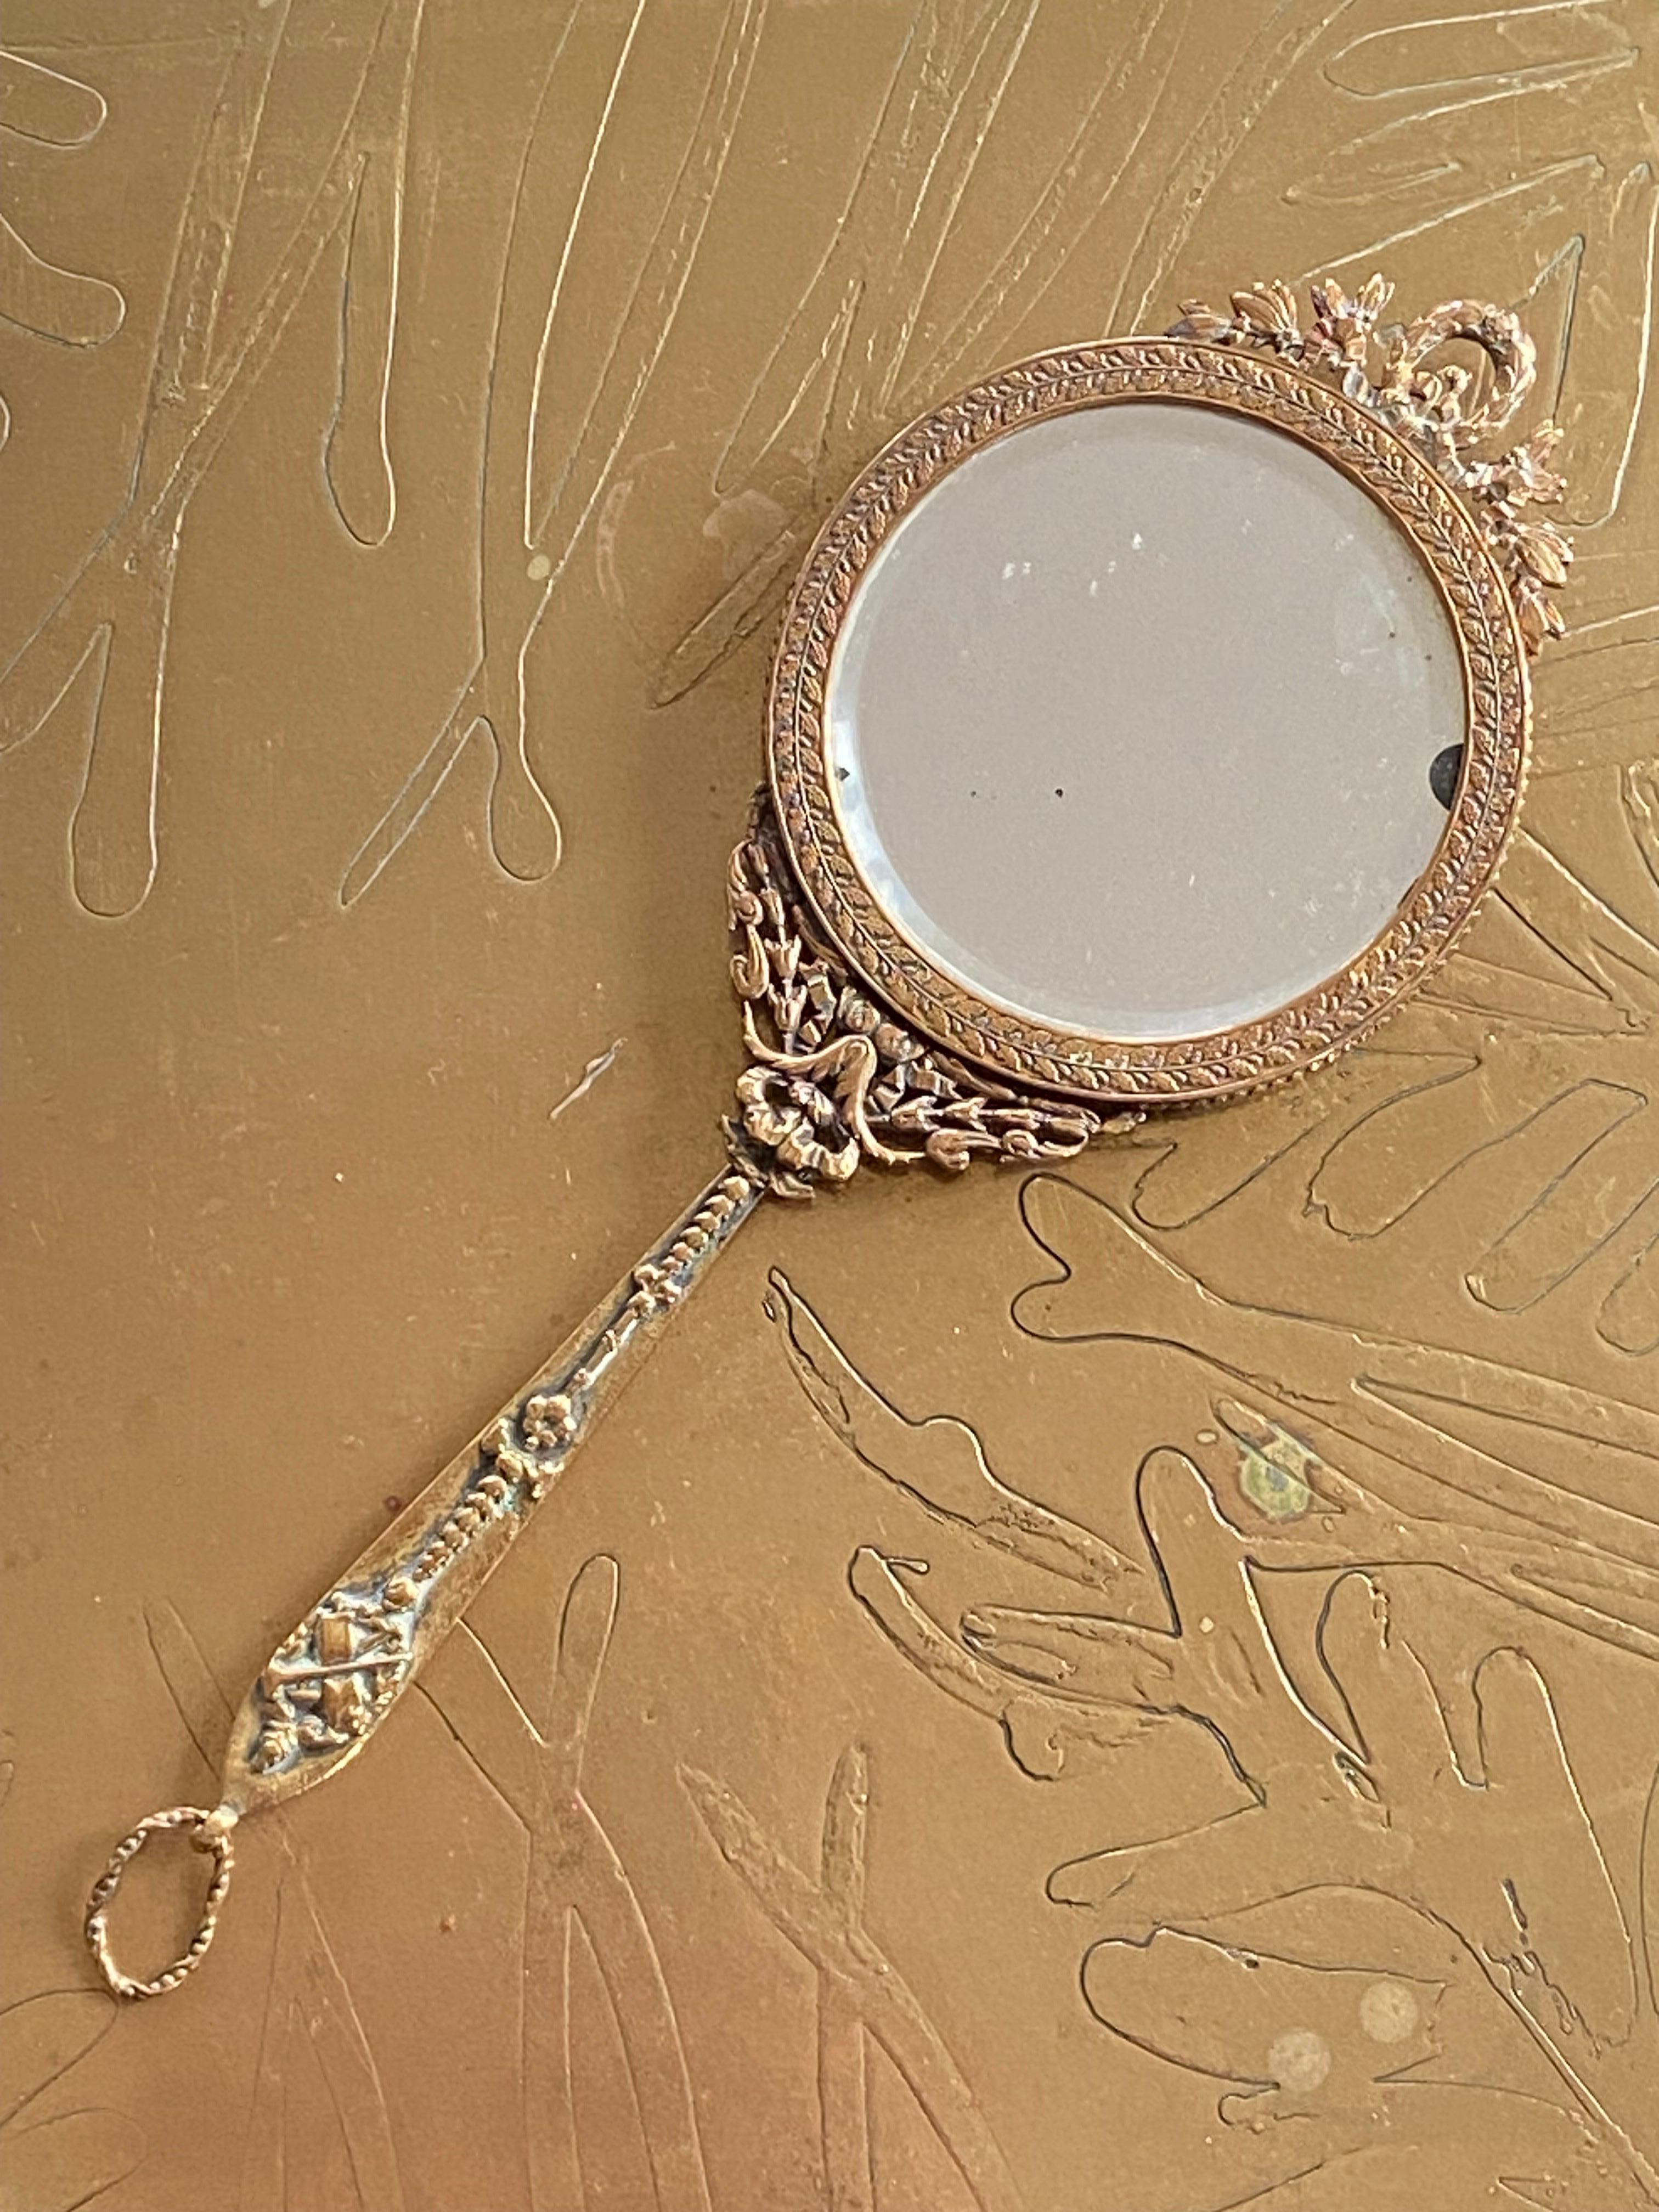 Extremely delicate and fine hand mirror made of engraved metal with finest decoration and a small portrait at the back of the piece.
Very good original condition with no restorations ever made.
France, circa 1860.